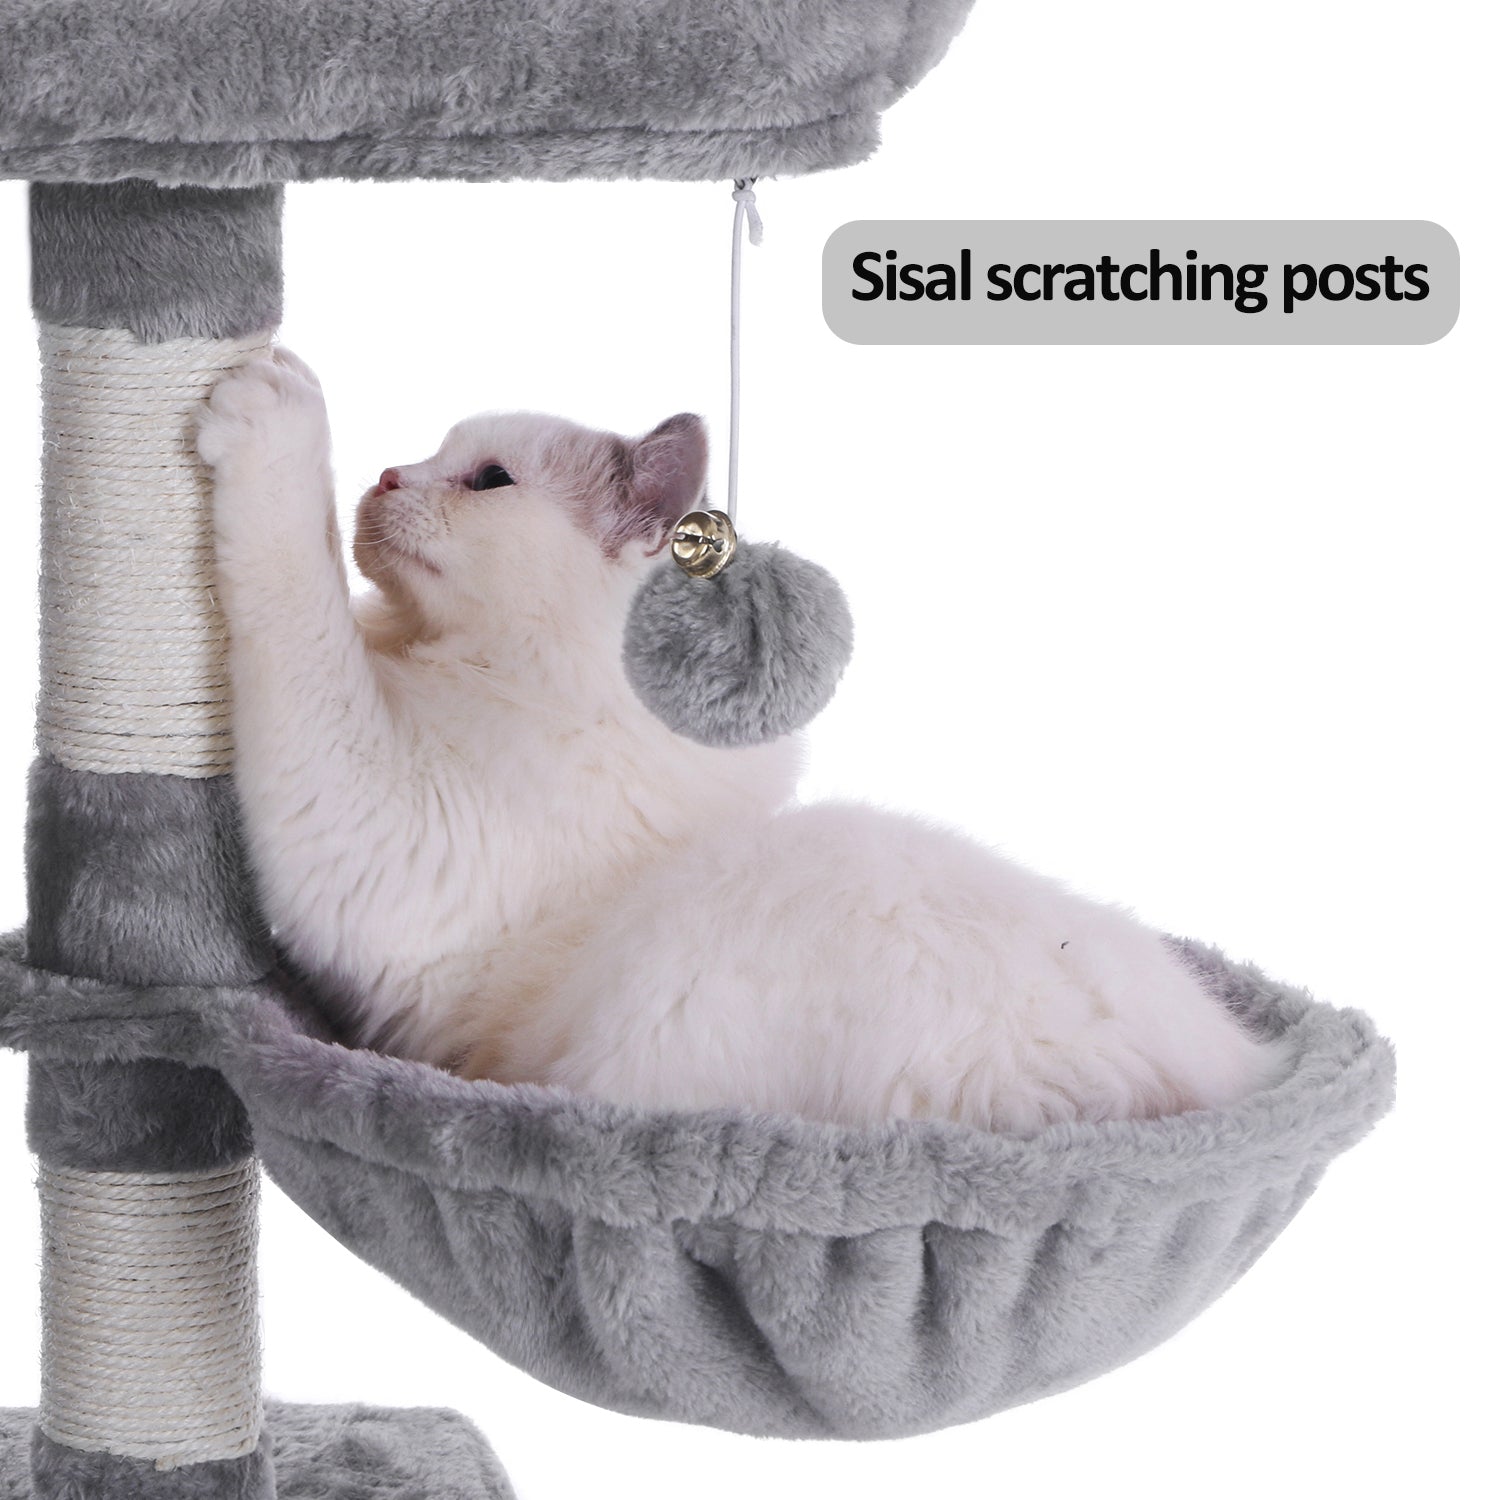 BEWISHOME Cat Tree Condo with Sisal Scratching Posts, Plush Perch, Dual Houses and Basket, Cat Tower Furniture Kitty Activity Center Kitten Play House MMJ06L Animals & Pet Supplies > Pet Supplies > Cat Supplies > Cat Furniture BEWISHOME   